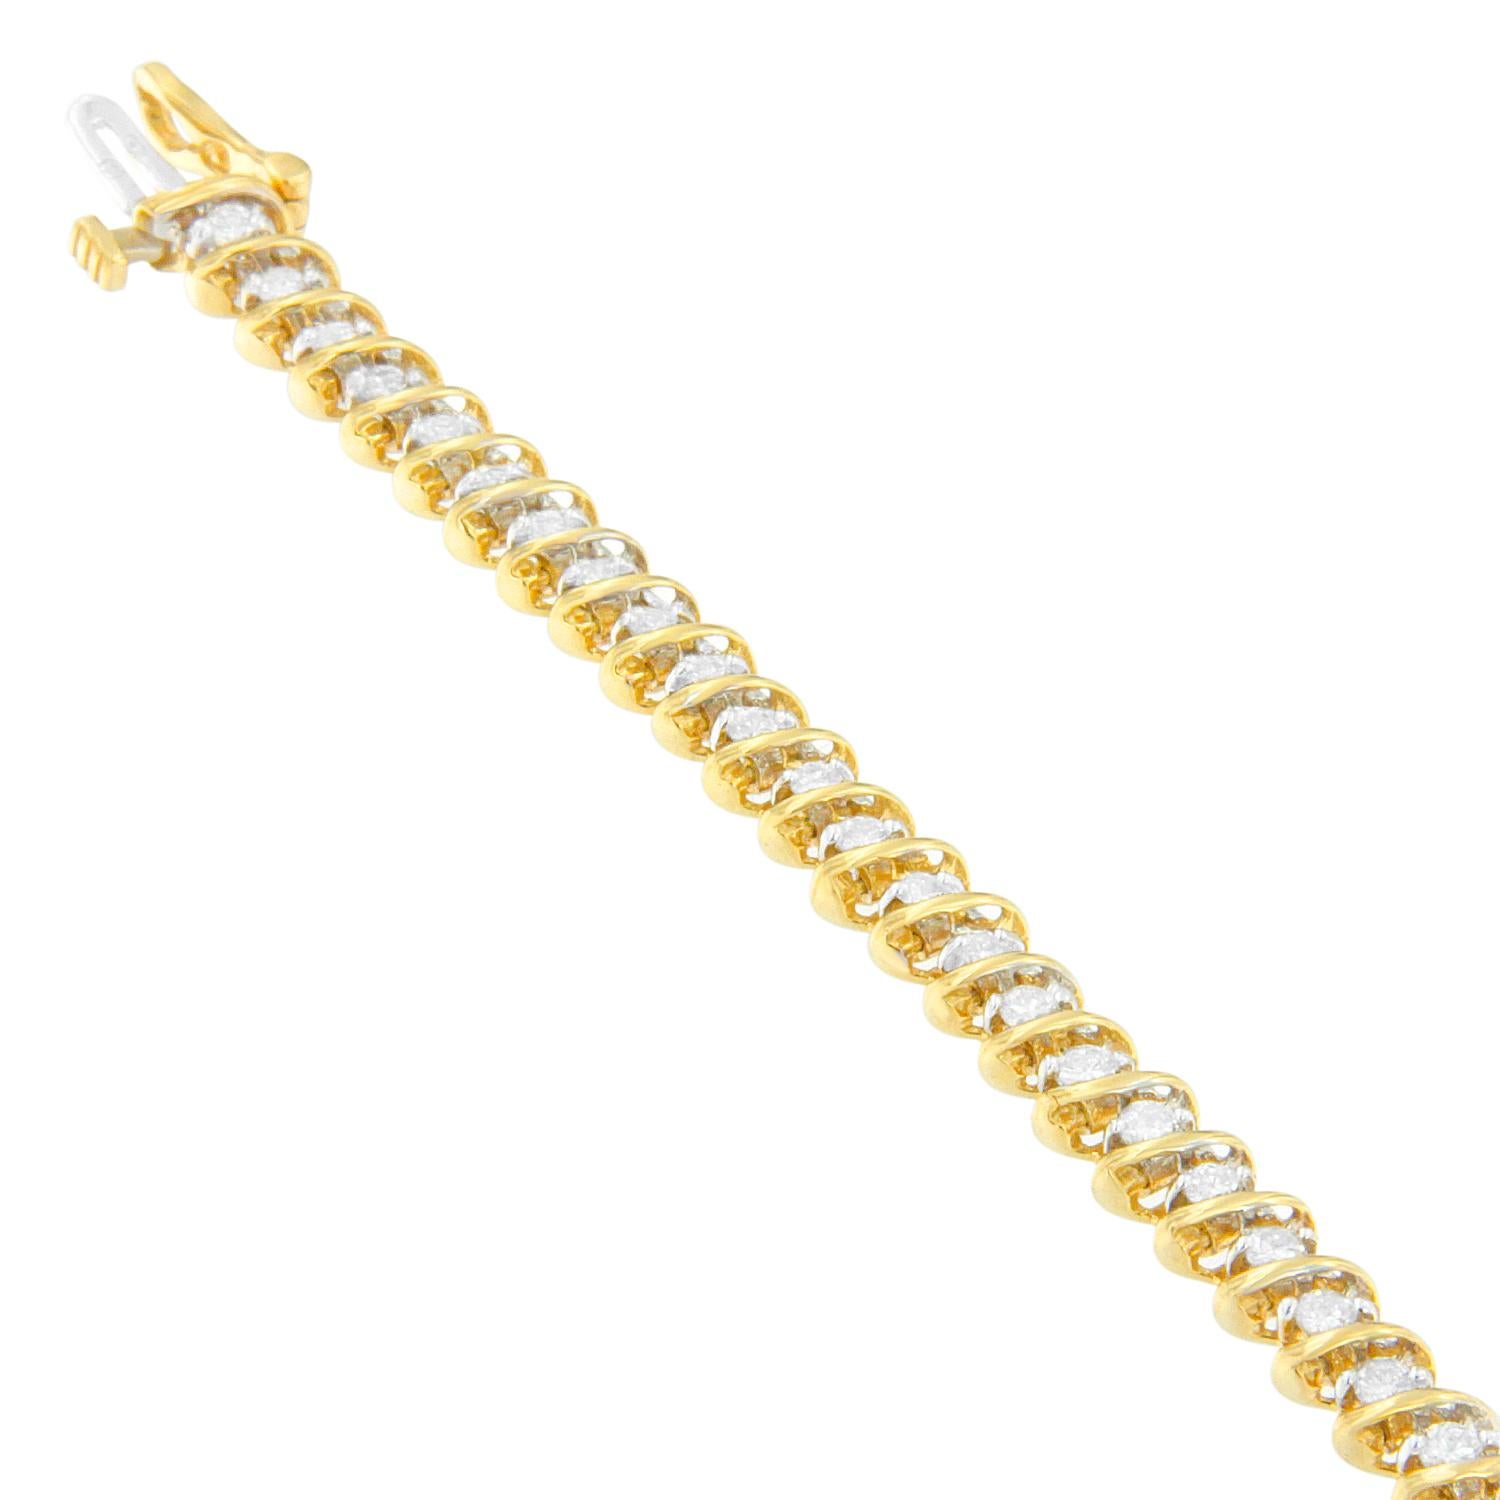 Bold meets brilliant! This unique bracelet is crafted with classic round cut diamonds nestled between raised bands of high shine 18 karat yellow gold to form a dazzling spiral effect for the woman who loves to stand out from the crowd. Packaging